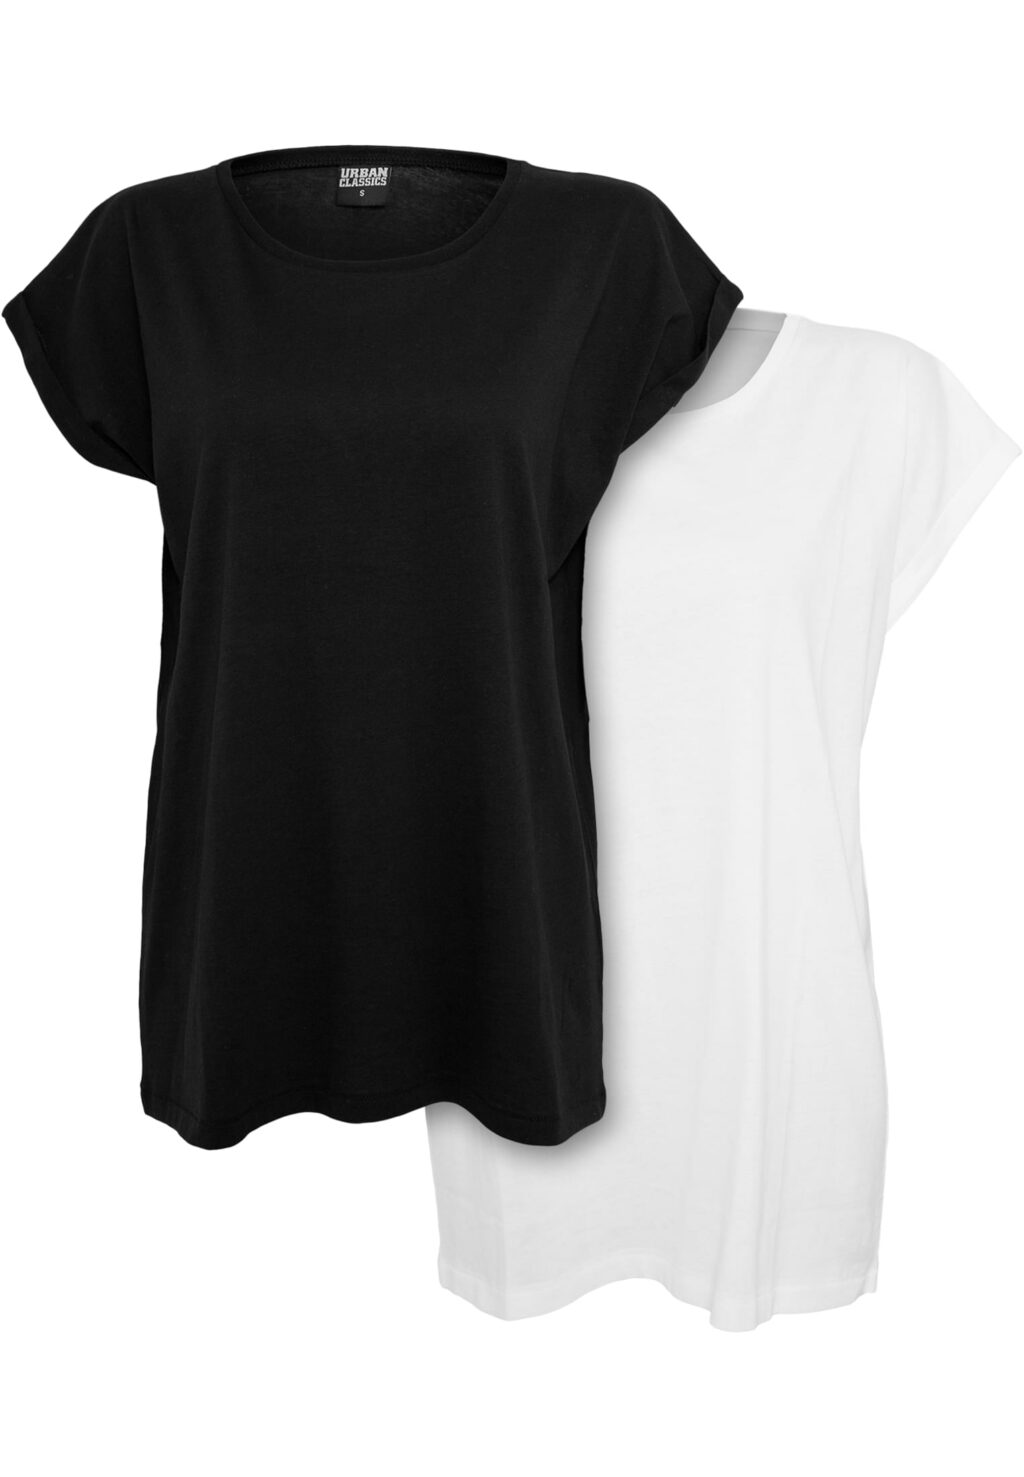 Urban Classics Ladies Extended Shoulder Tee 2-Pack black/white TB771A